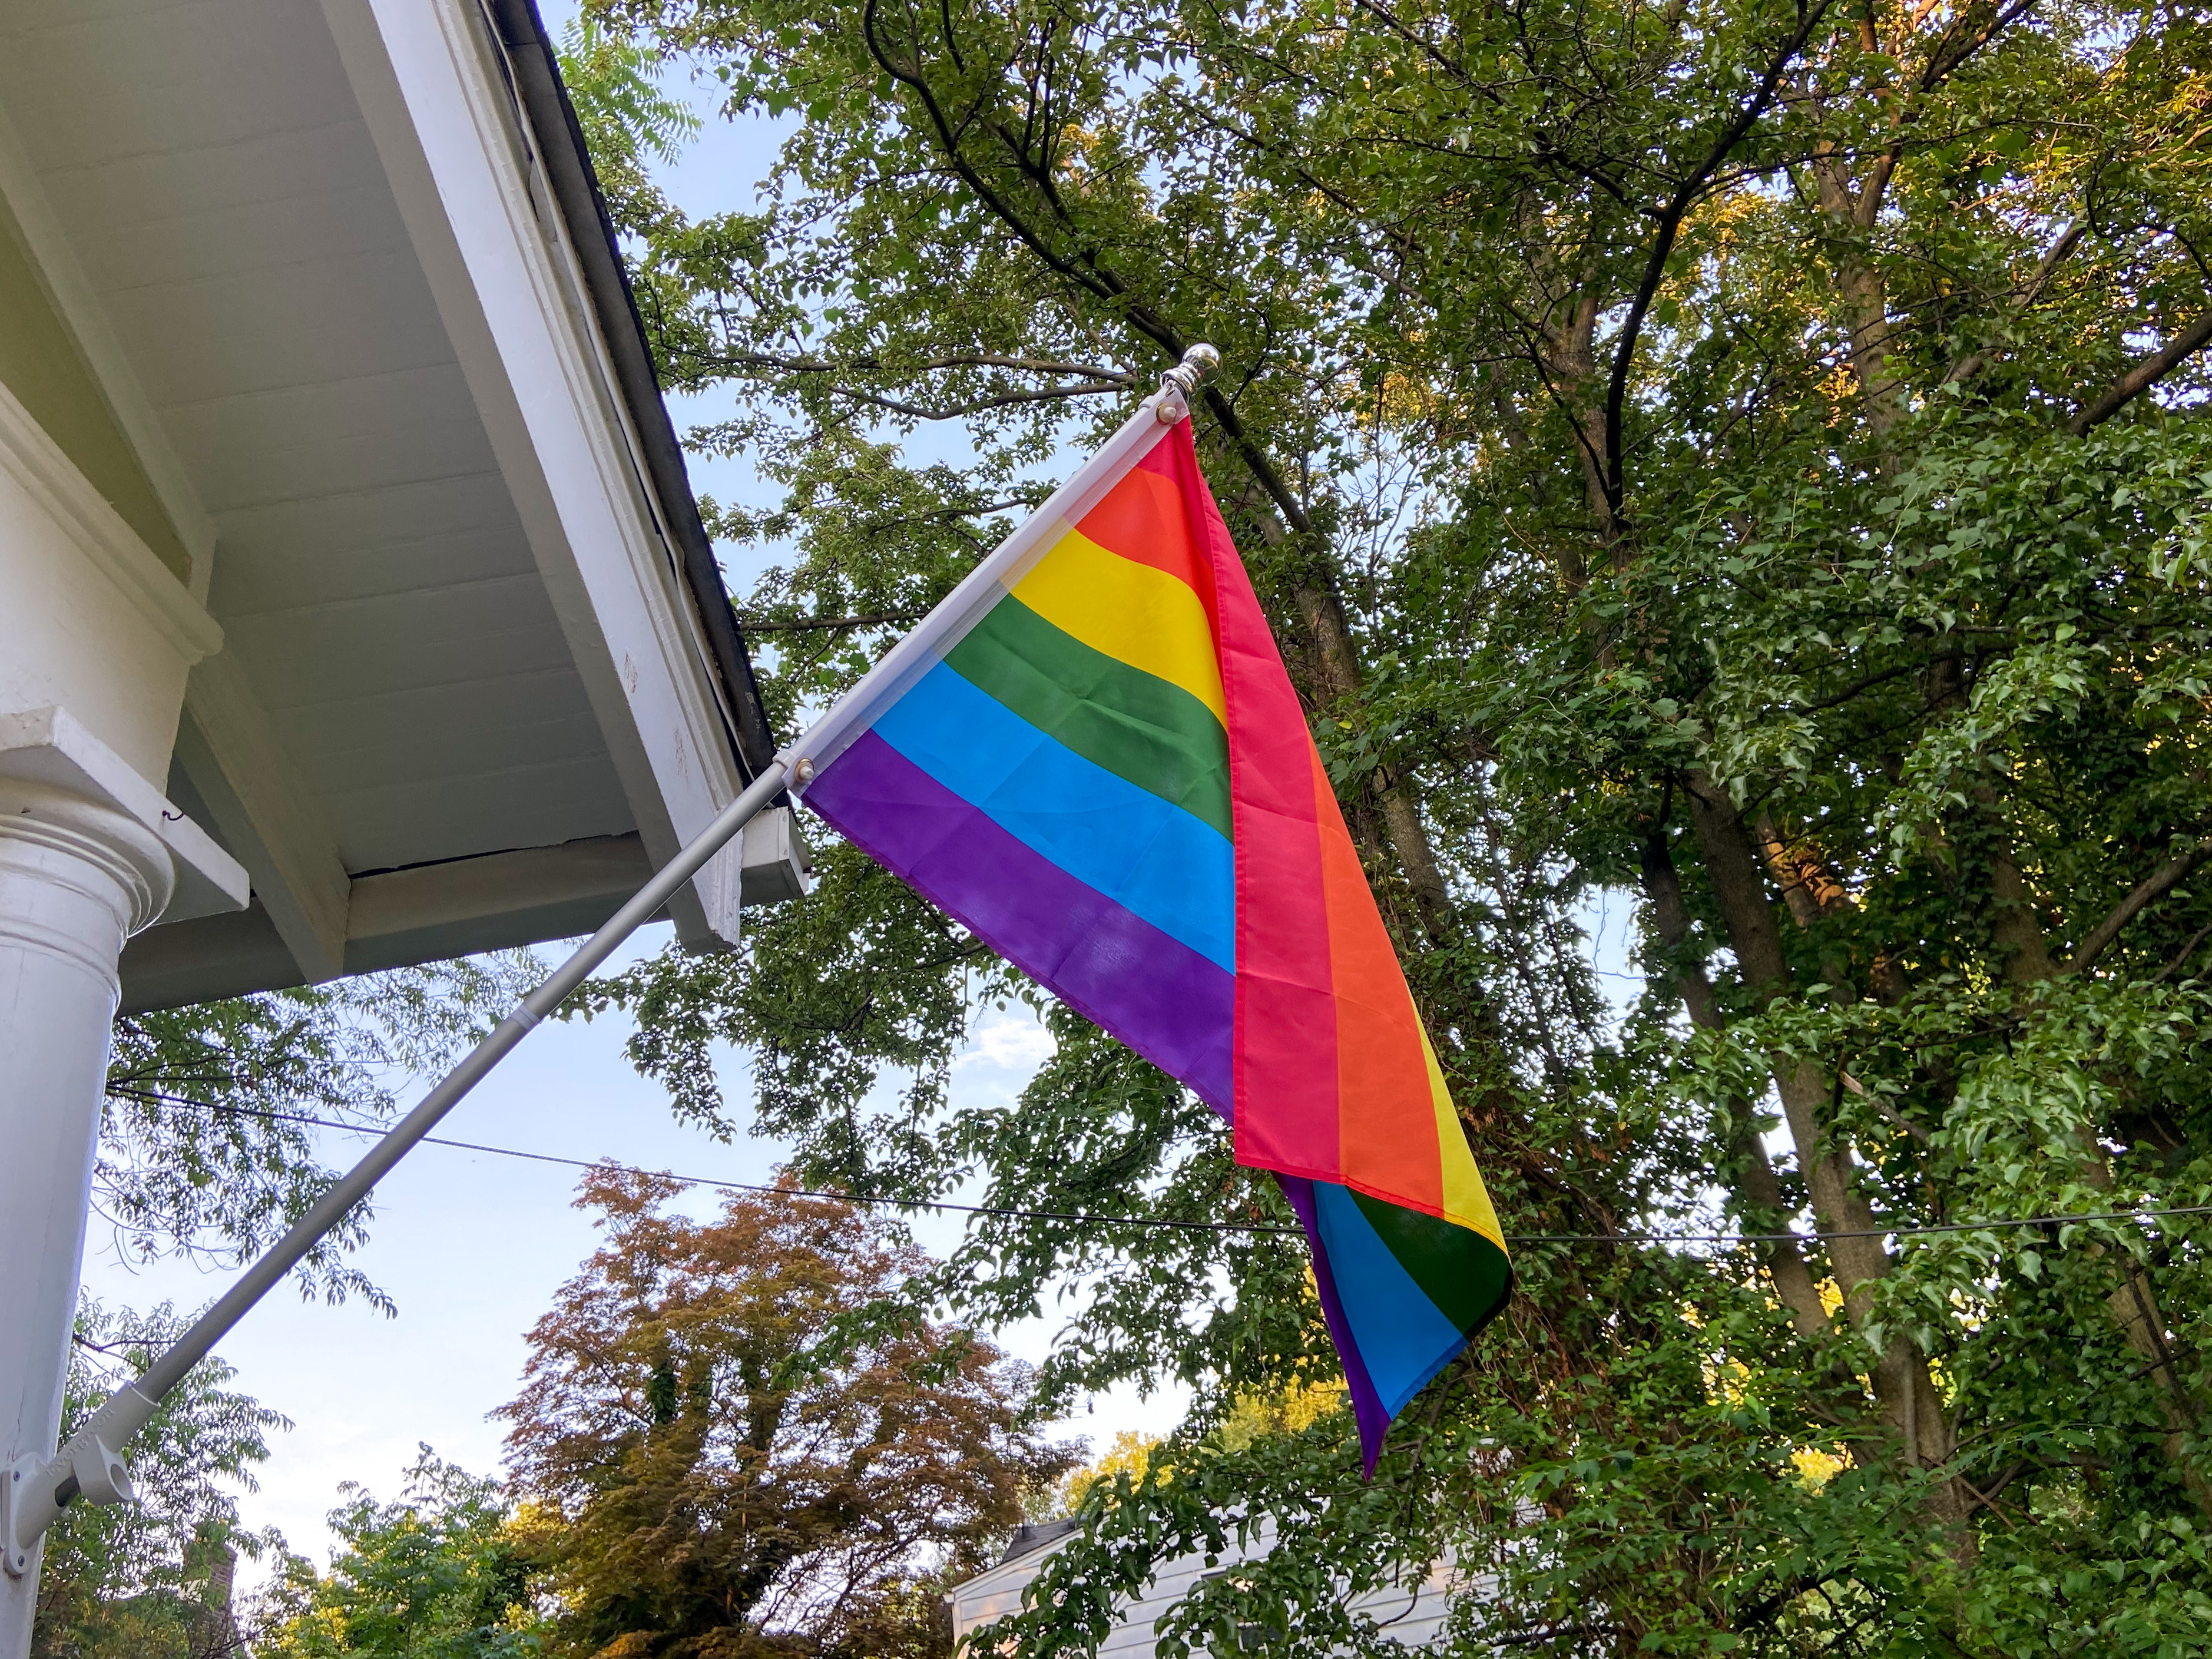 A photo of a Pride flag hanging outside a New Jersey home.